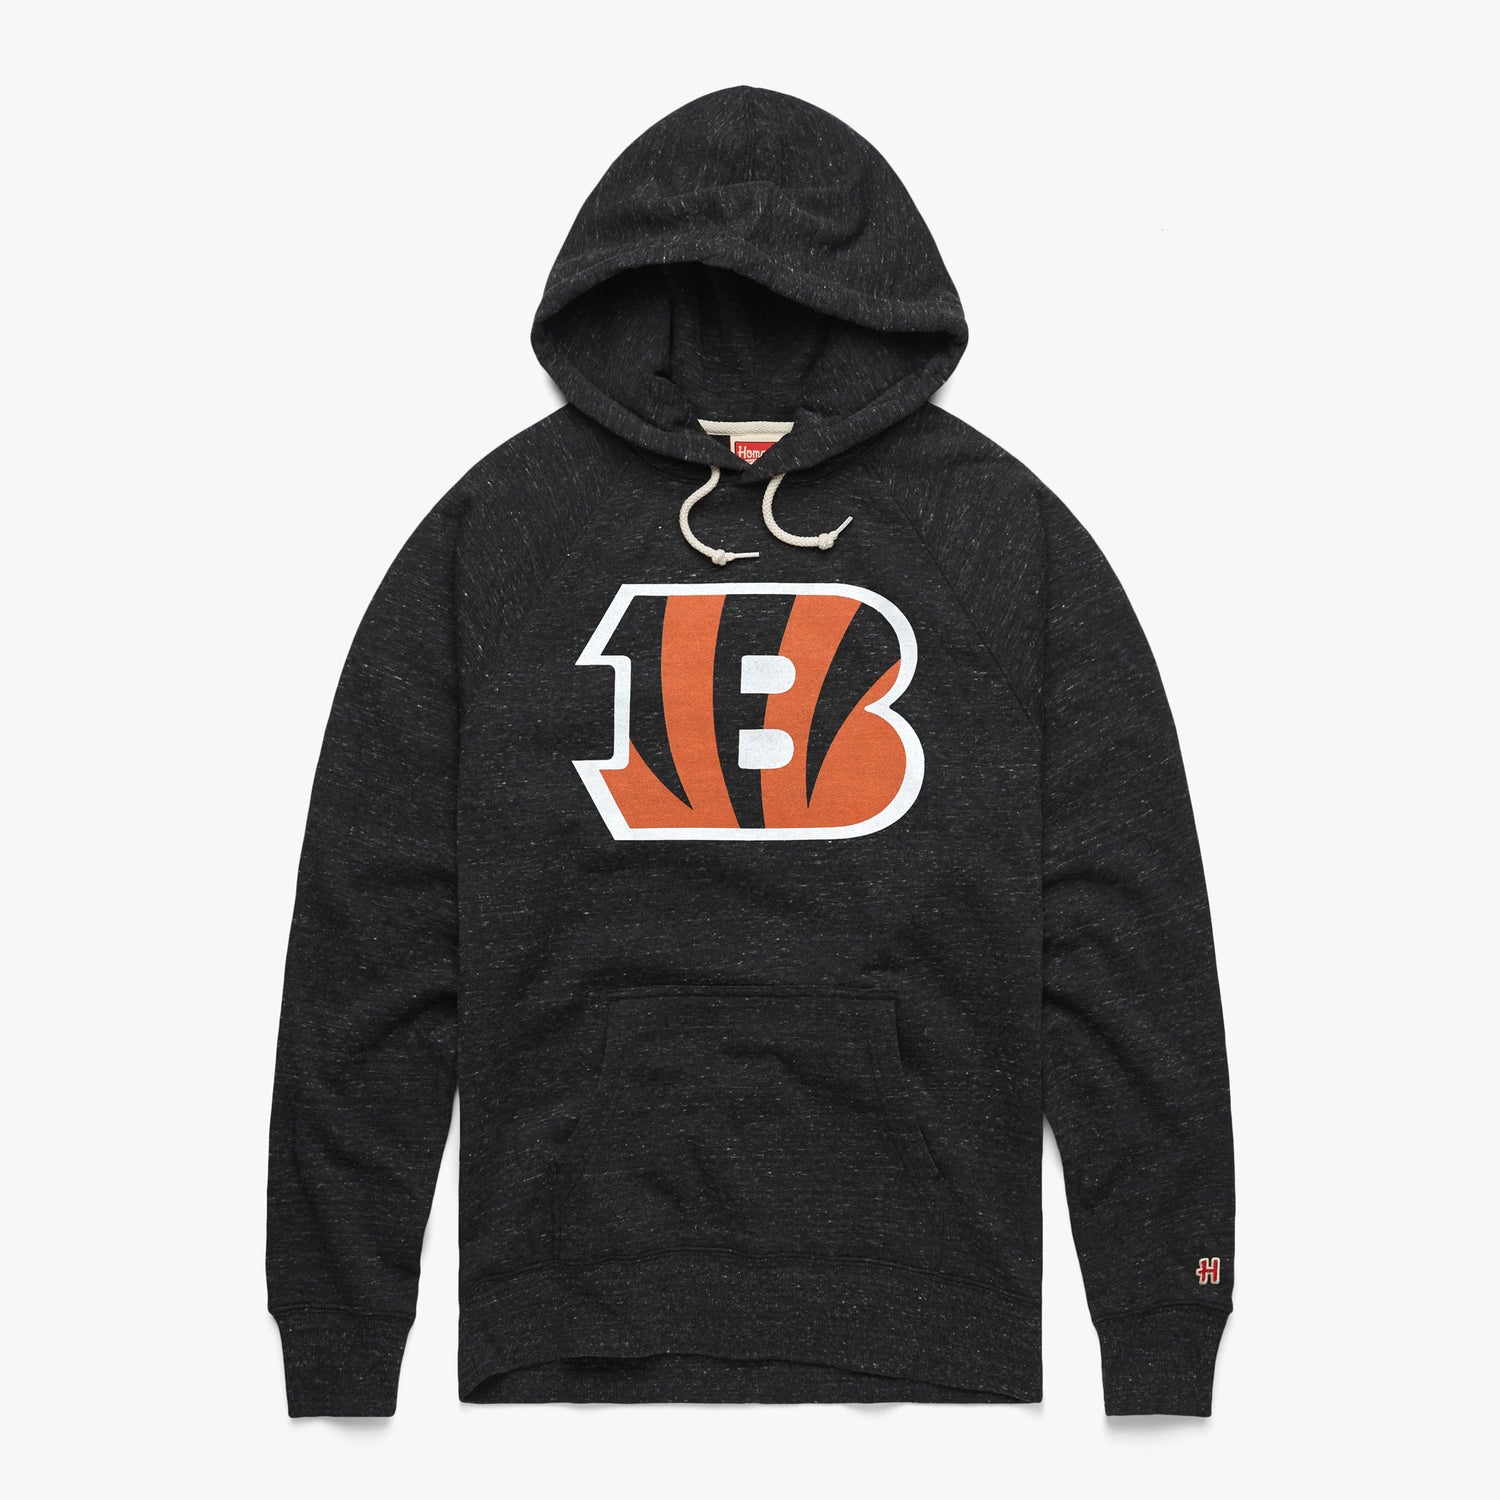 Cincinnati Bengals '21 Hoodie from Homage. | Officially Licensed Vintage NFL Apparel from Homage Pro Shop.